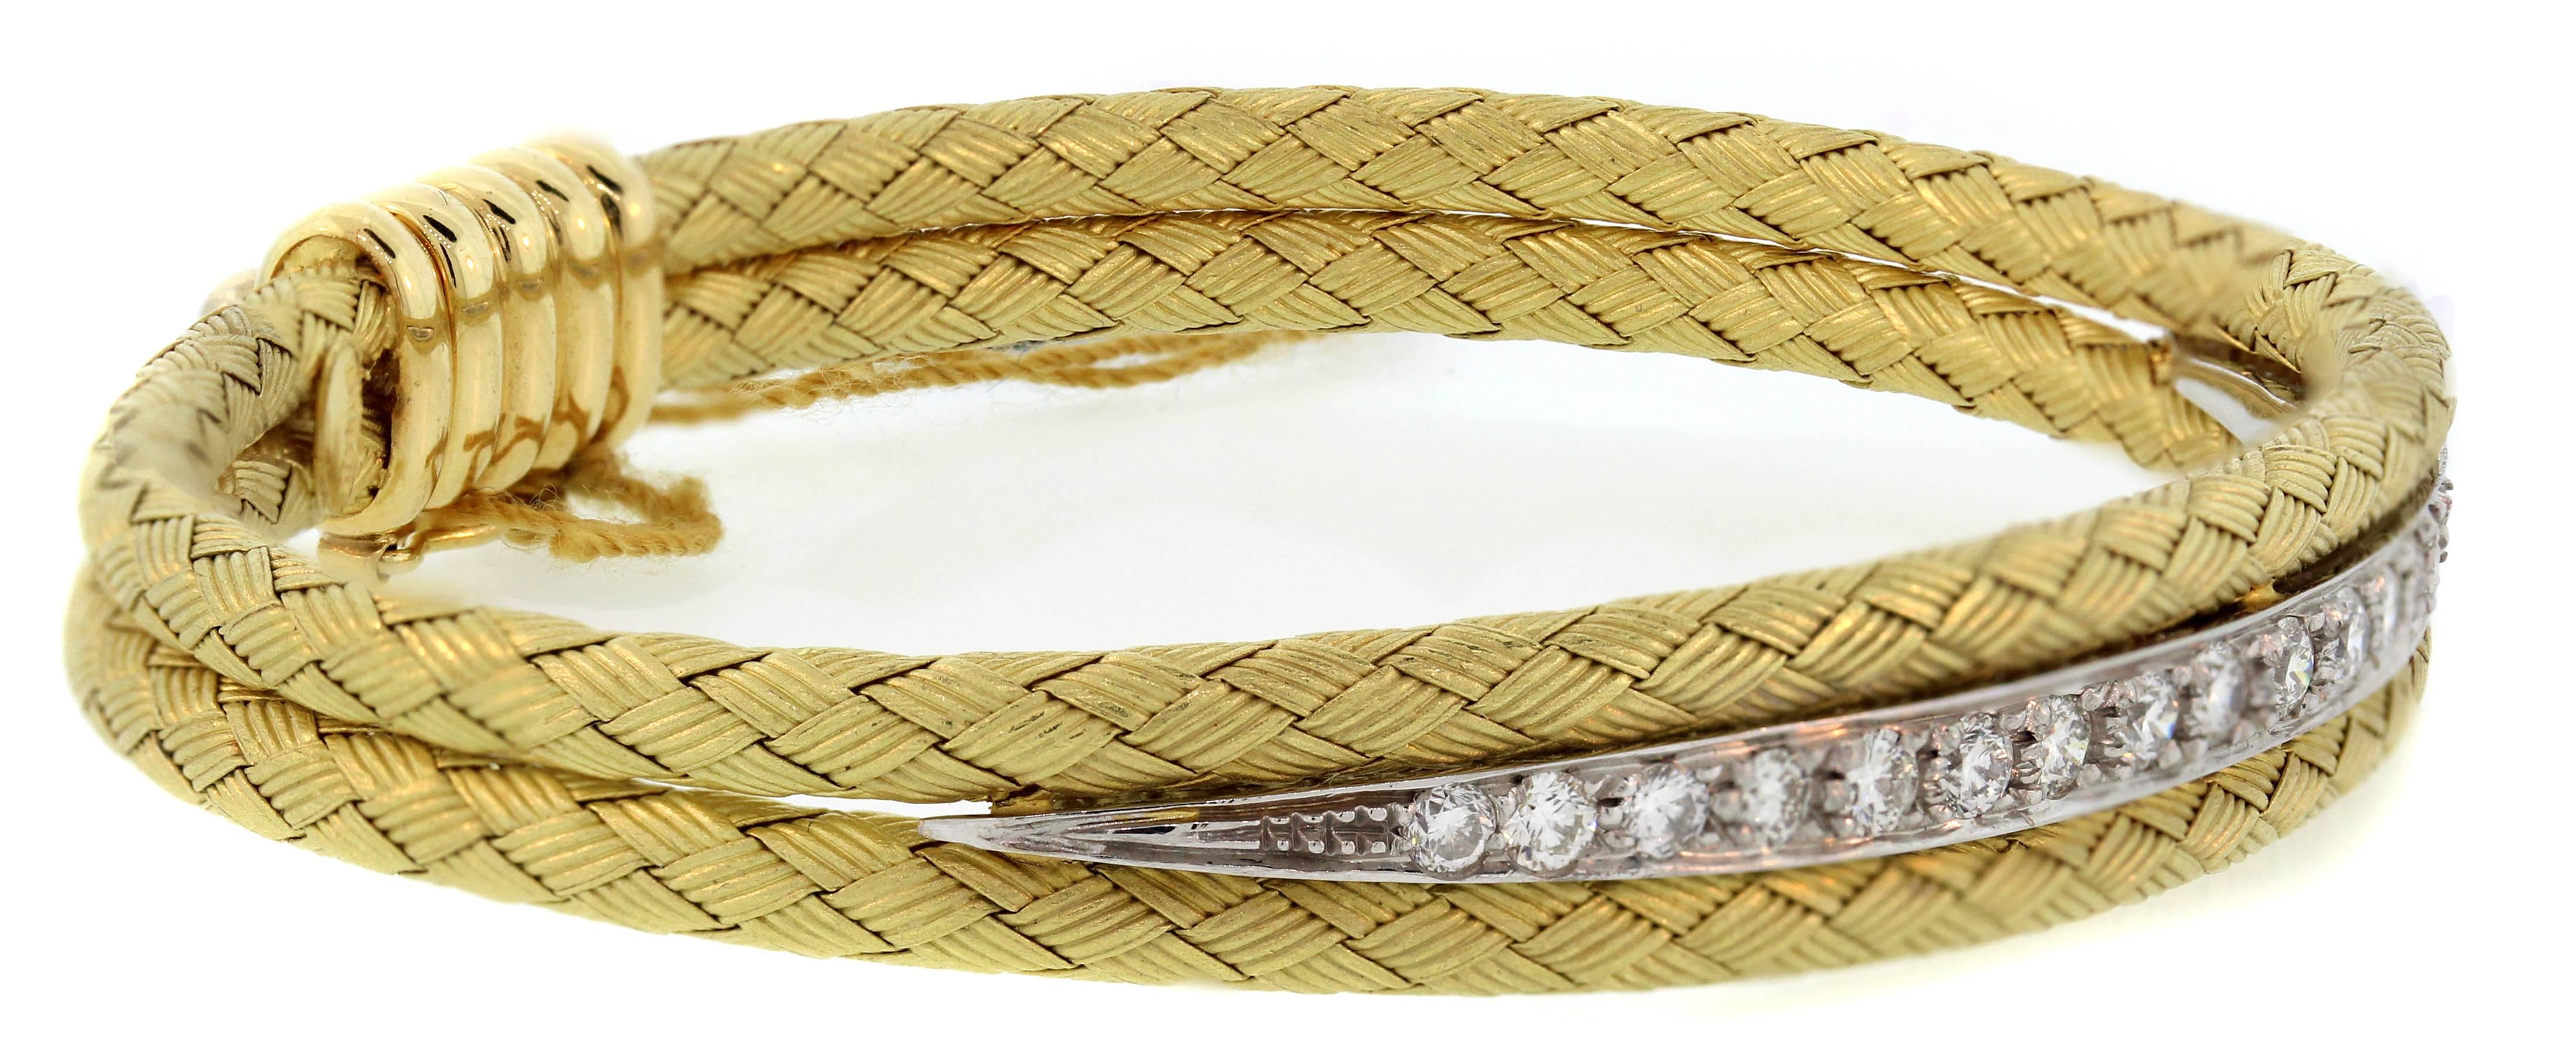 18K Yellow and White Gold Bracelet with Diamonds 

0.90ct. Diamonds cover mid section of bracelet surrounded by gorgeous textured design work.

Bracelet is 0.35 inch wide and 7 inches in length.

Push open clasp along with safety used to lock and